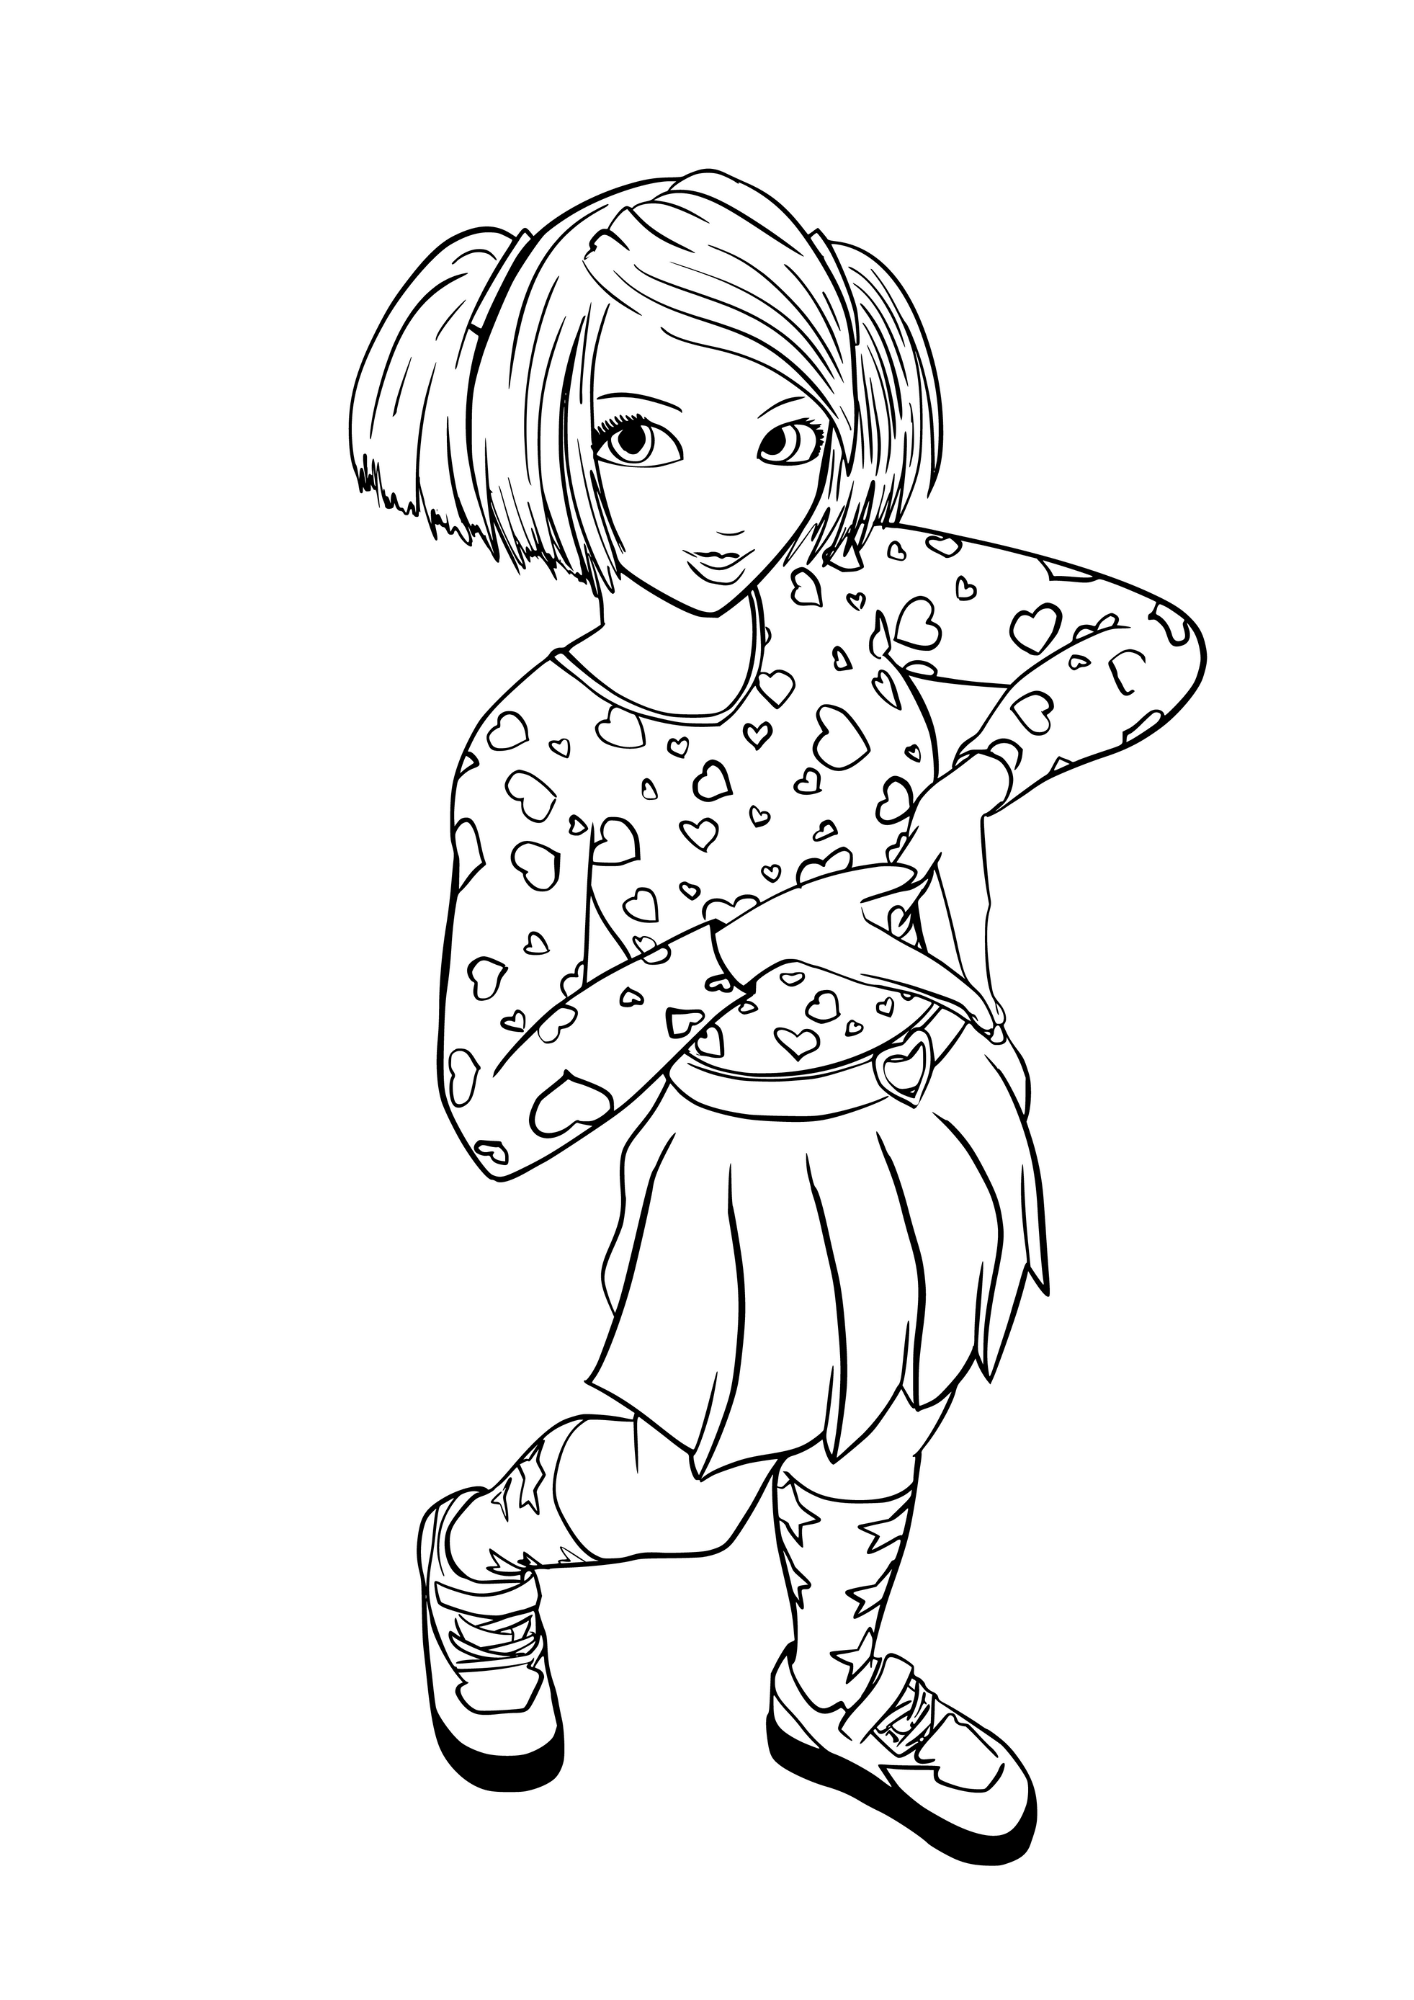  Girl in heart outfit coloring page